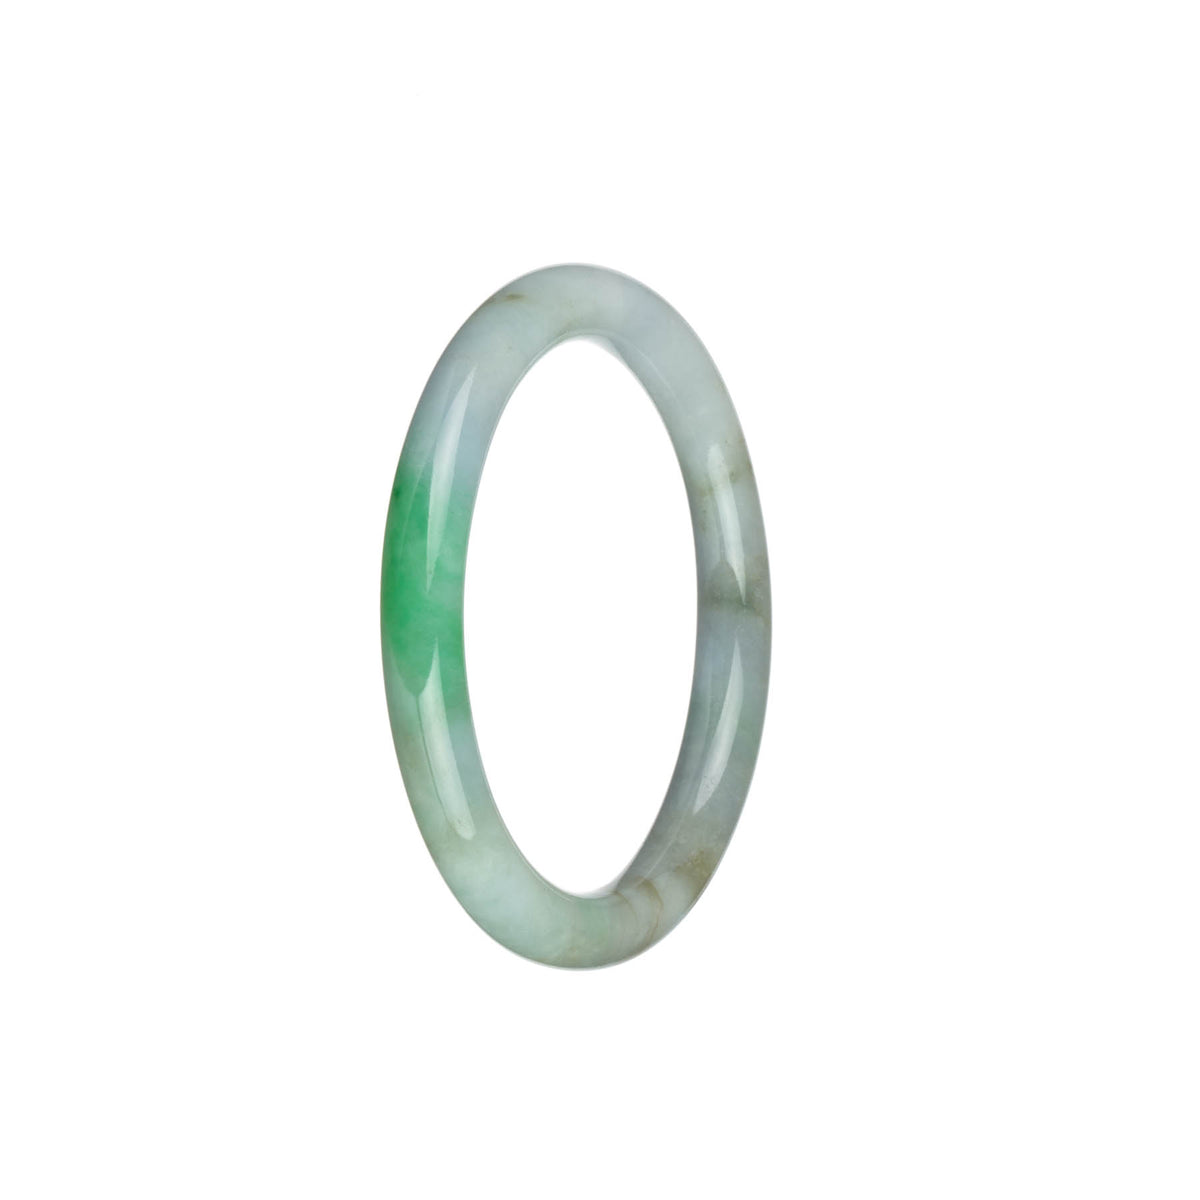 Genuine Grade A Faint Lavender and Pale Green with Emerald Green Traditional Jade Bangle Bracelet - 53mm Petite Round